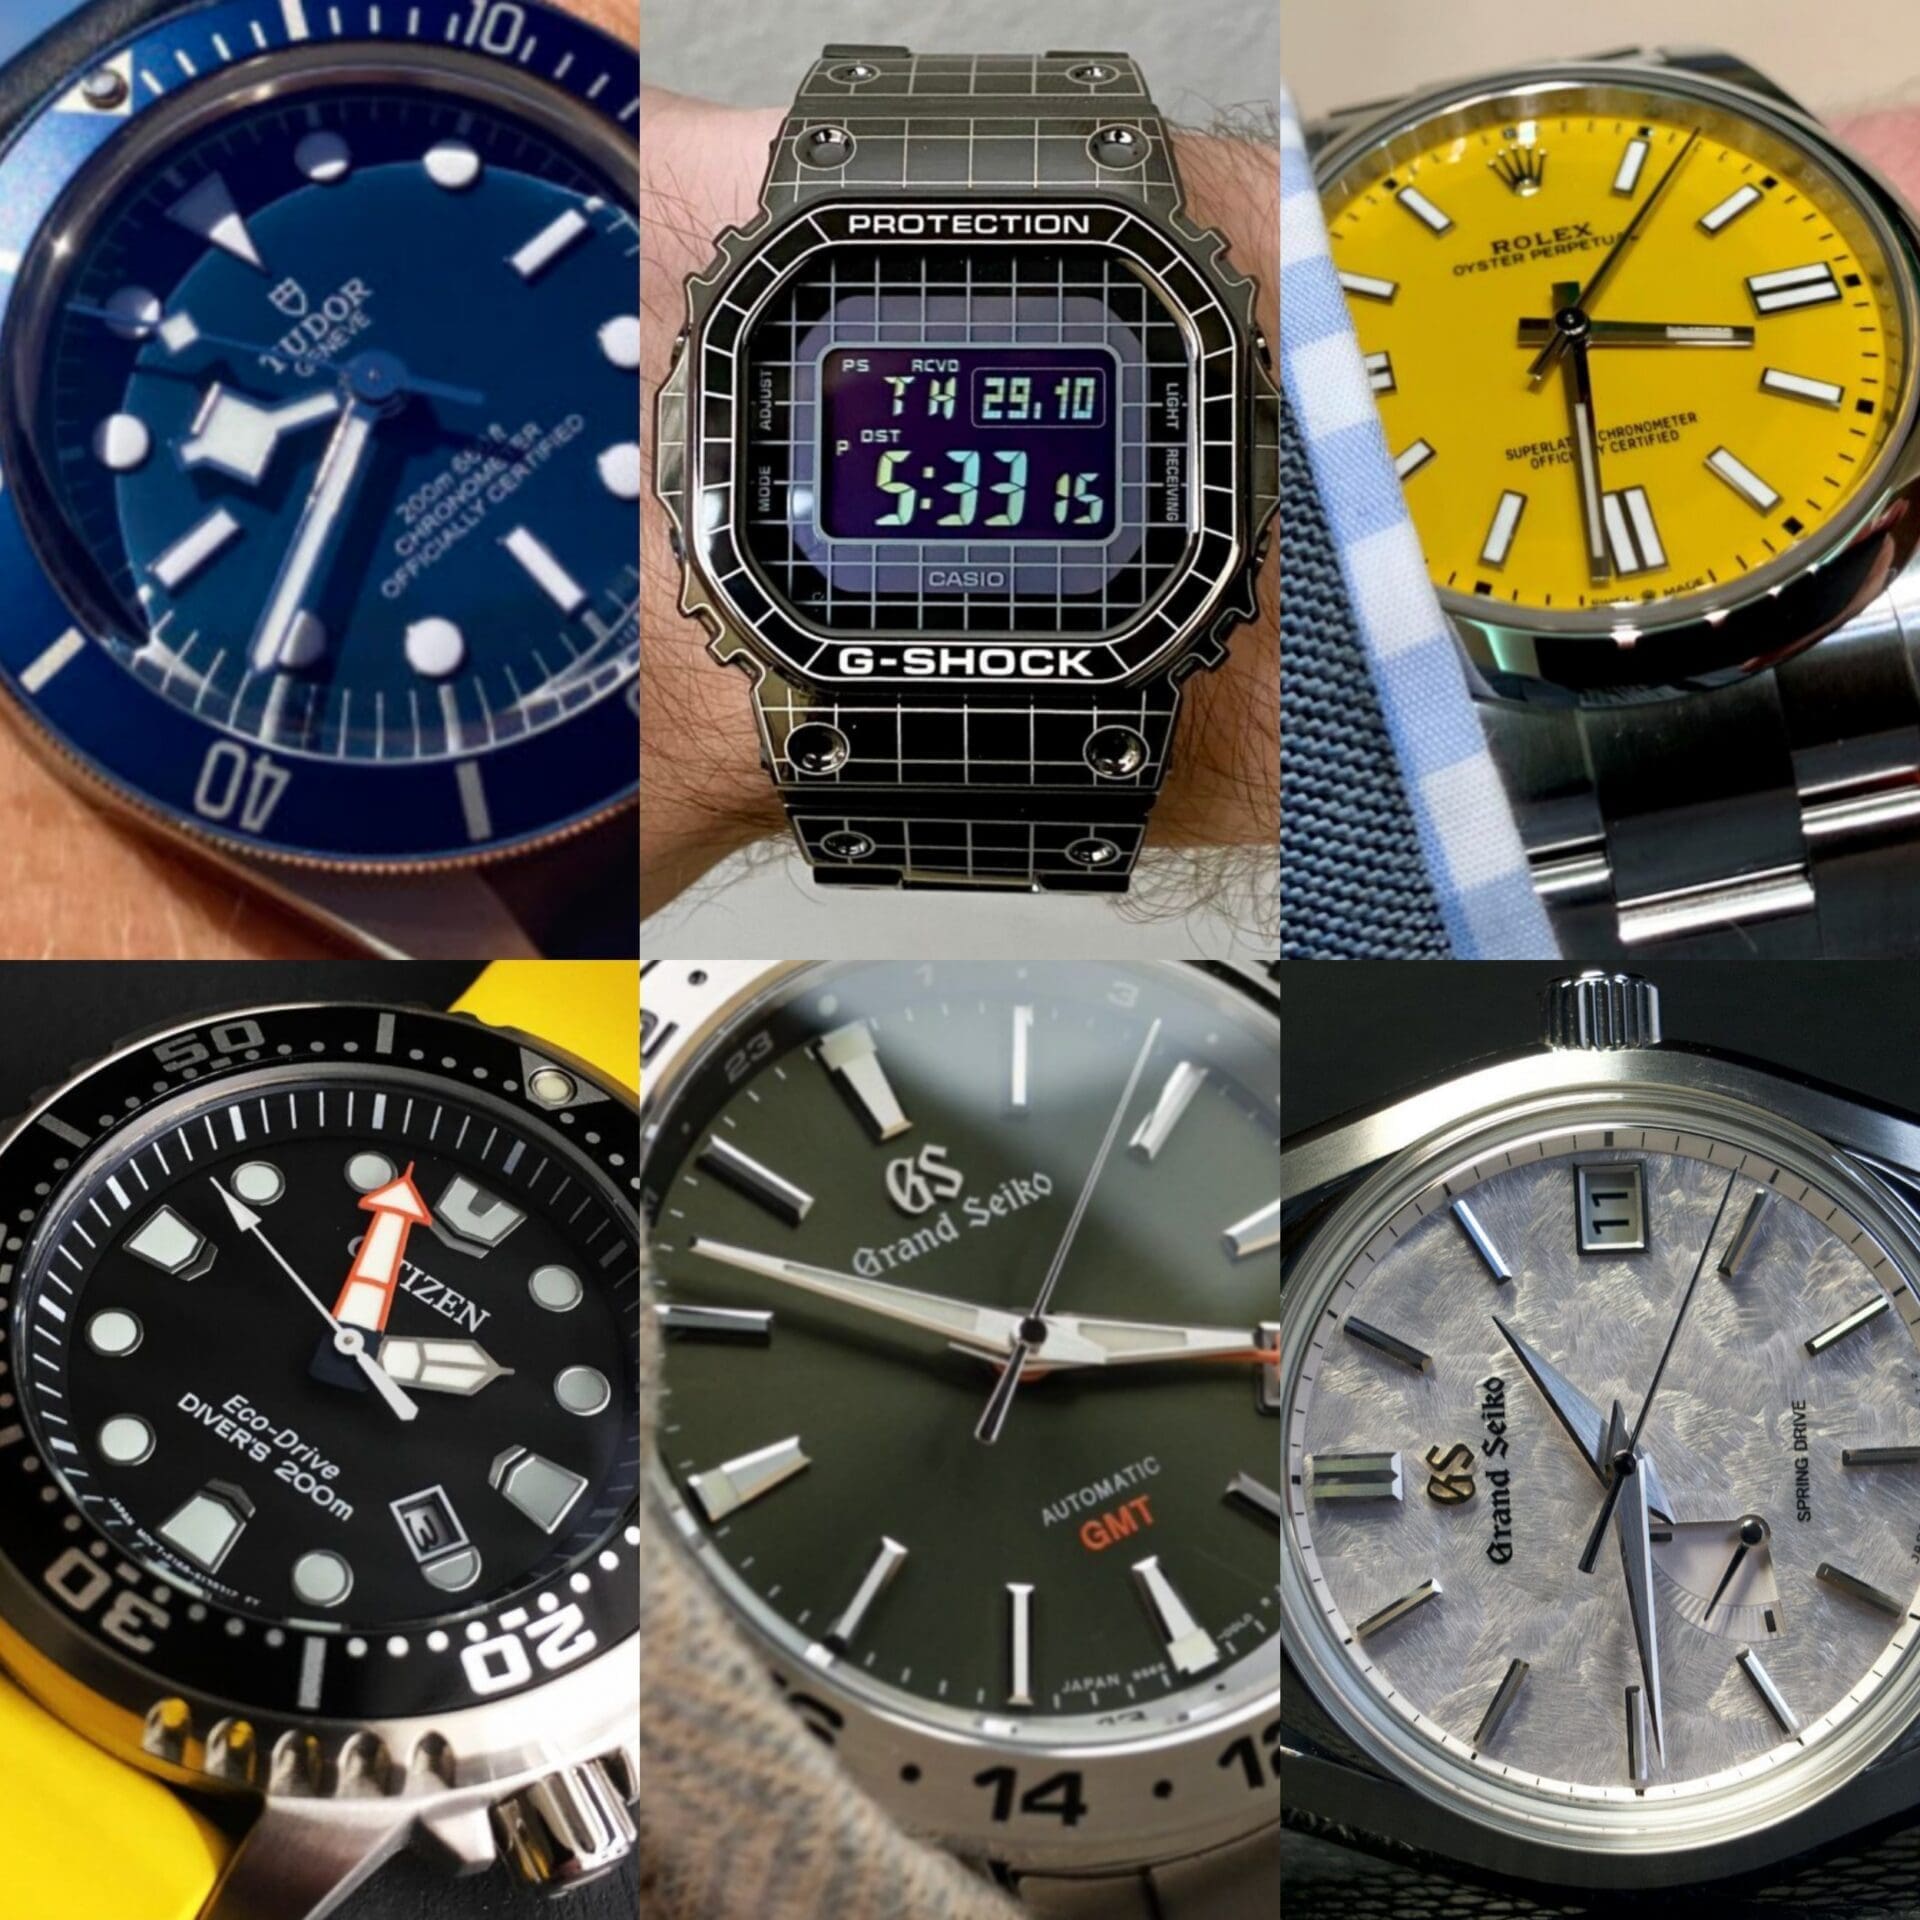 From G-Shock to Rolex: the Time+Tide team reveals the watch they wore the most in 2021